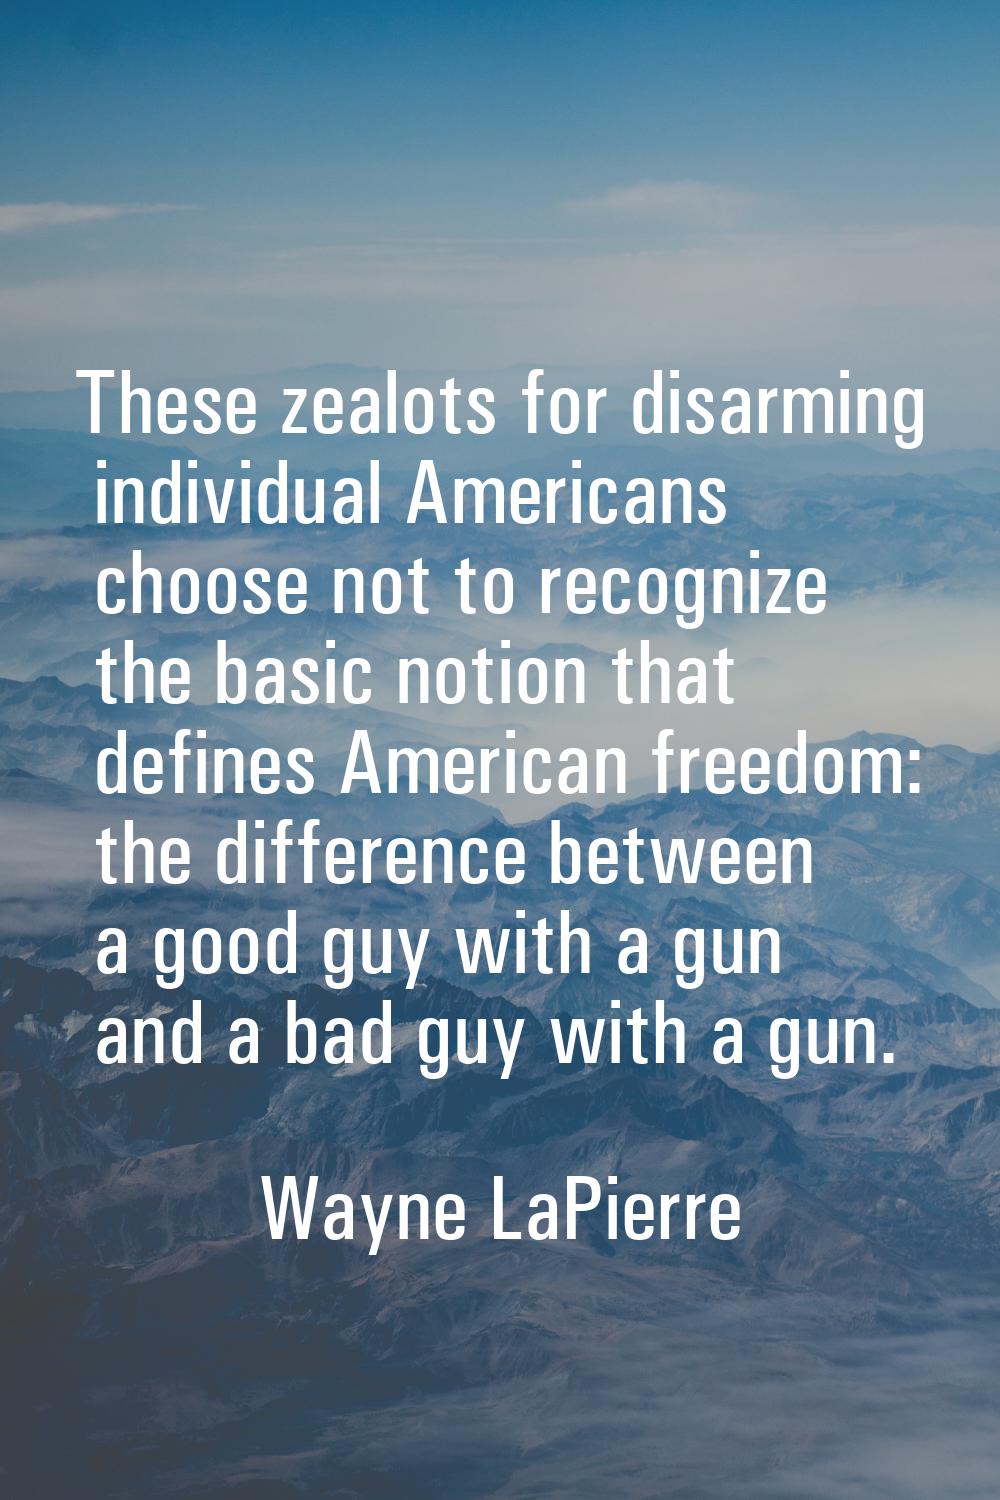 These zealots for disarming individual Americans choose not to recognize the basic notion that defi